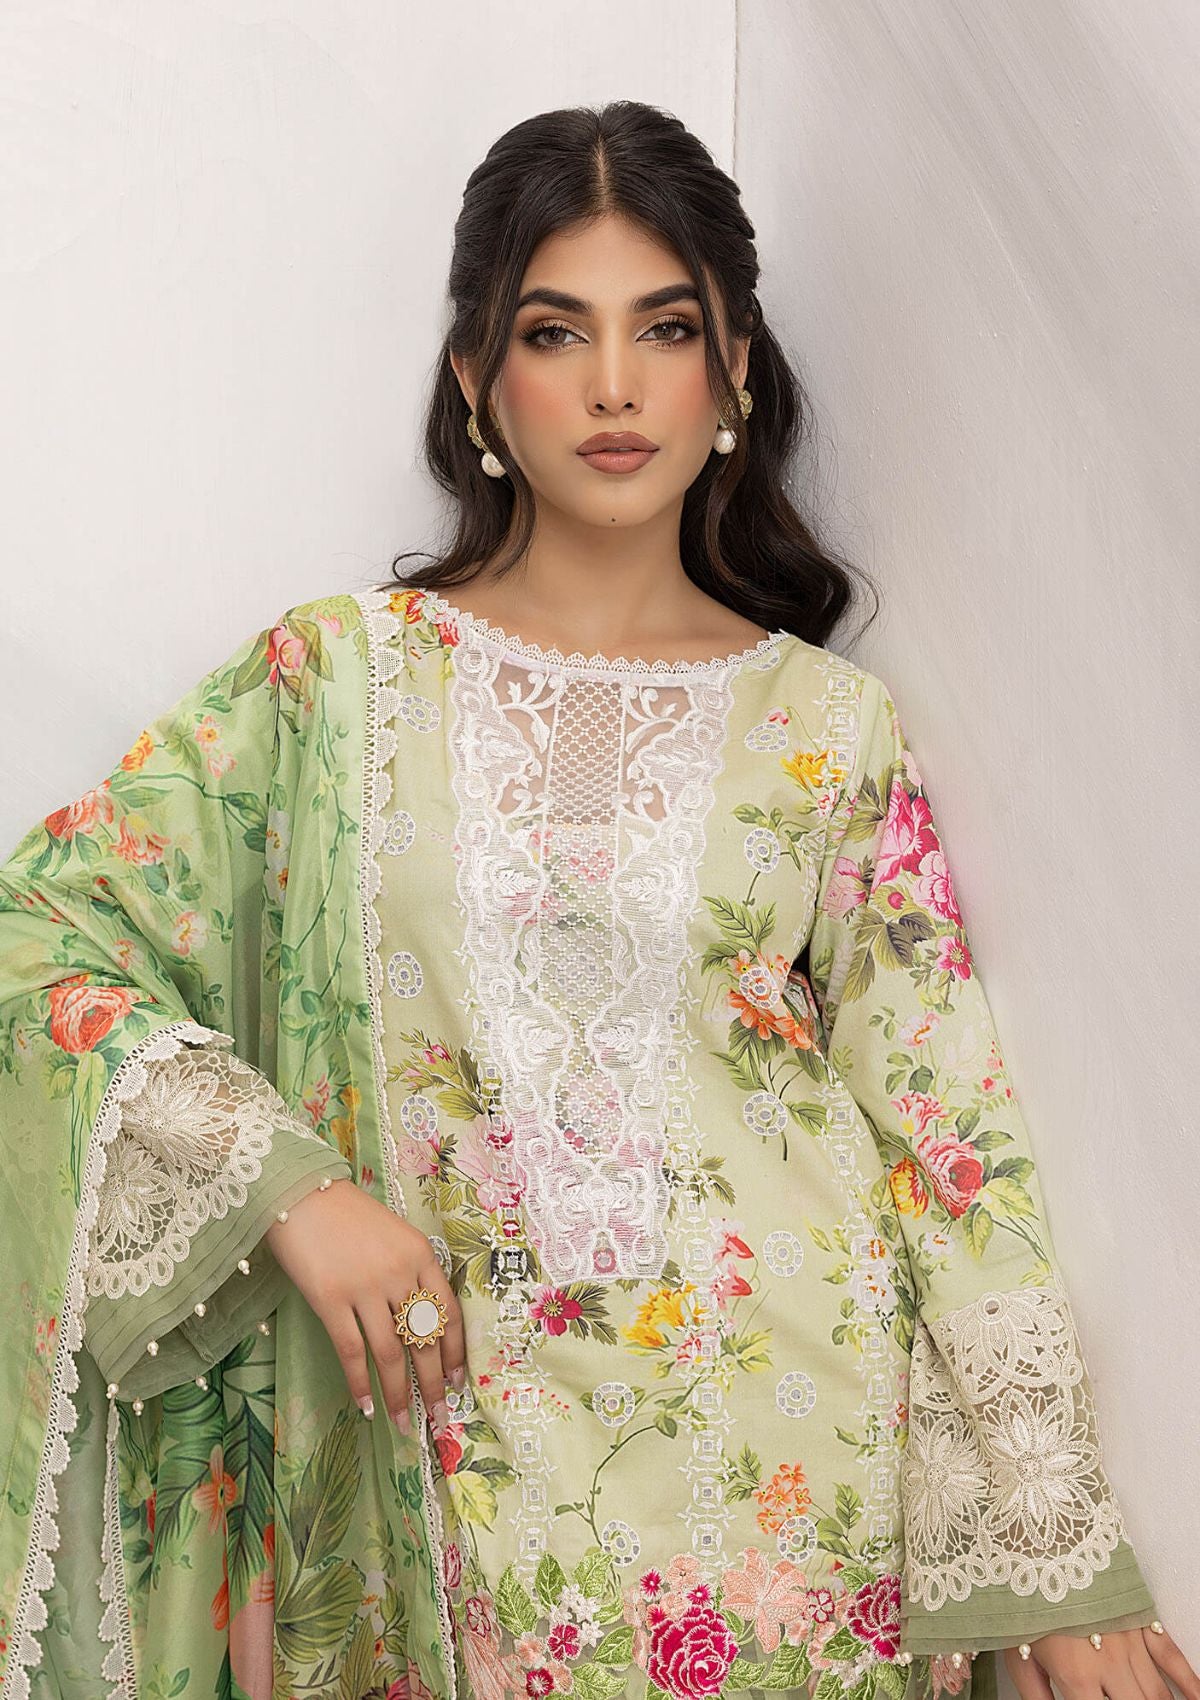 Lawn Collection - Asifa & Nabeel - Aleyna - V02 - CAMELLIA (ALV-07)